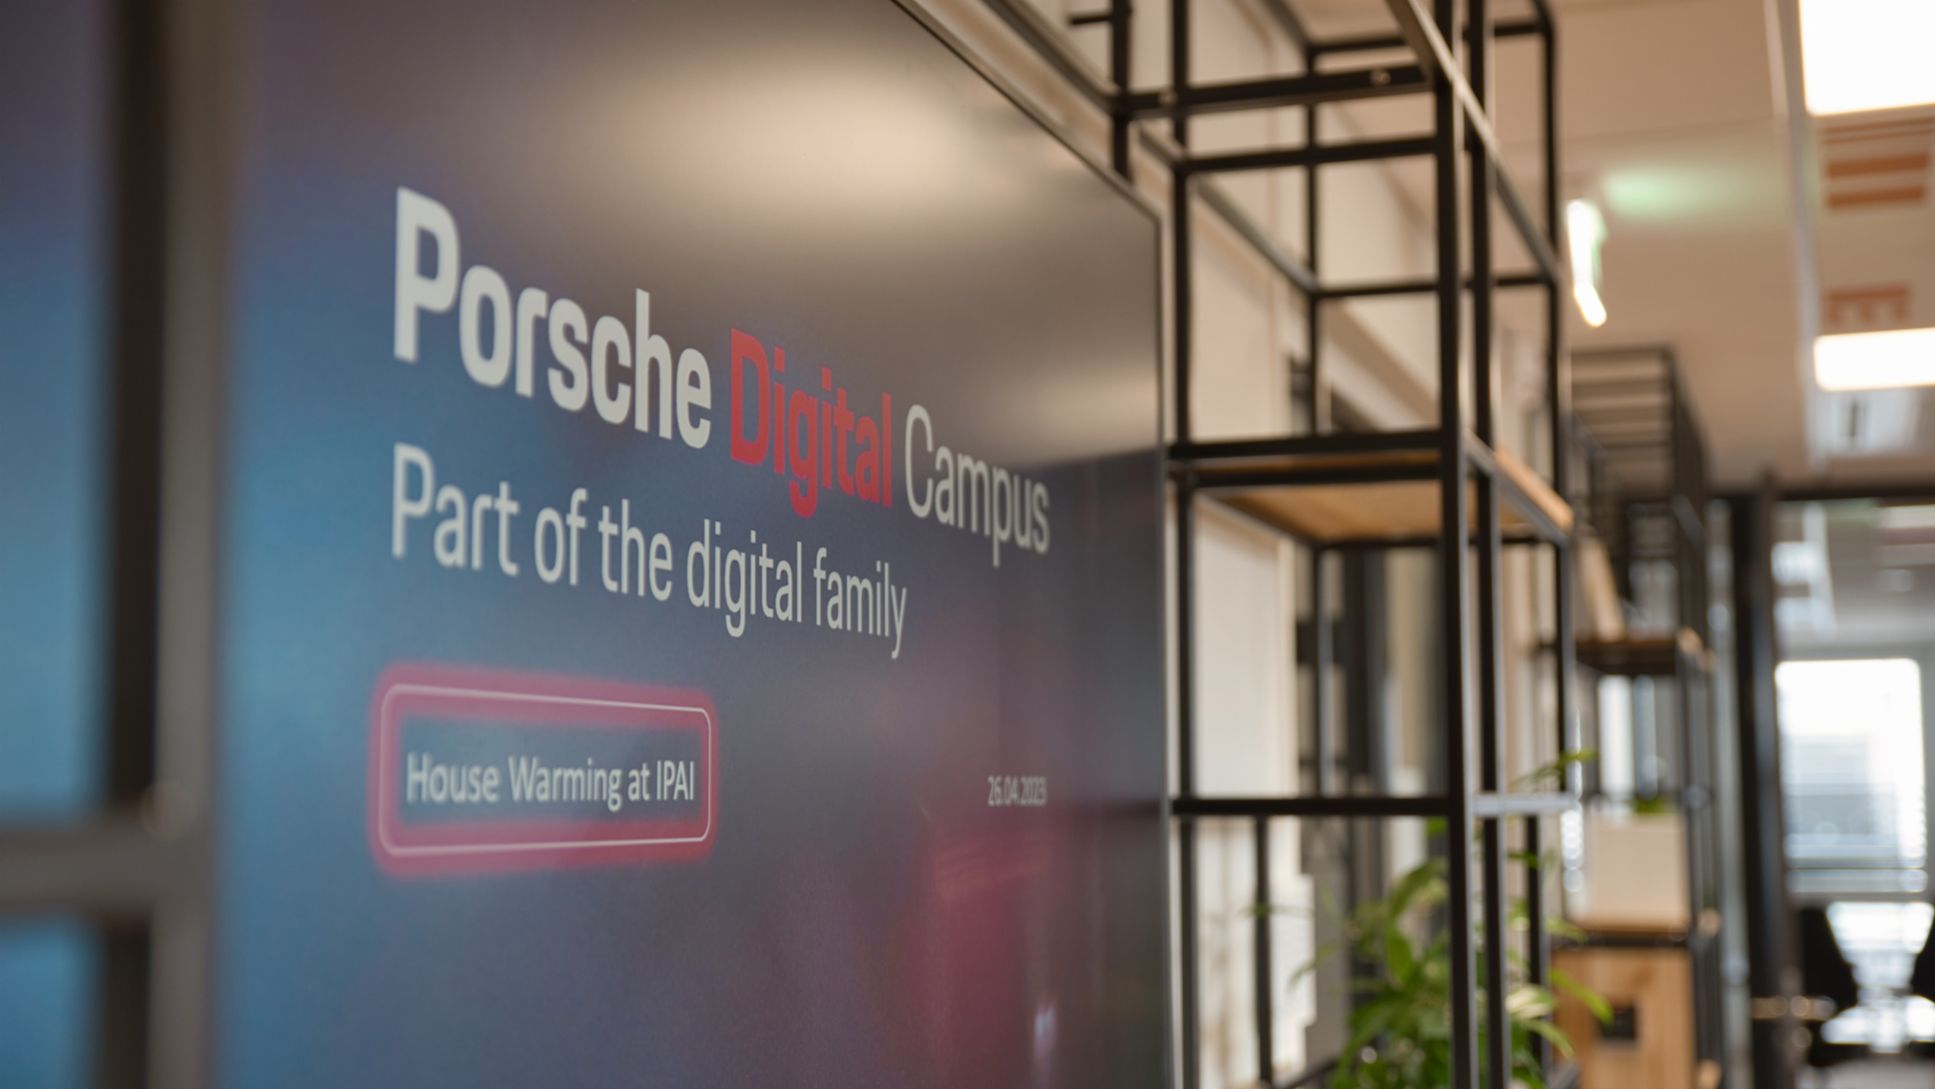 Porsche Digital Campus promotes networking of enterprise and science